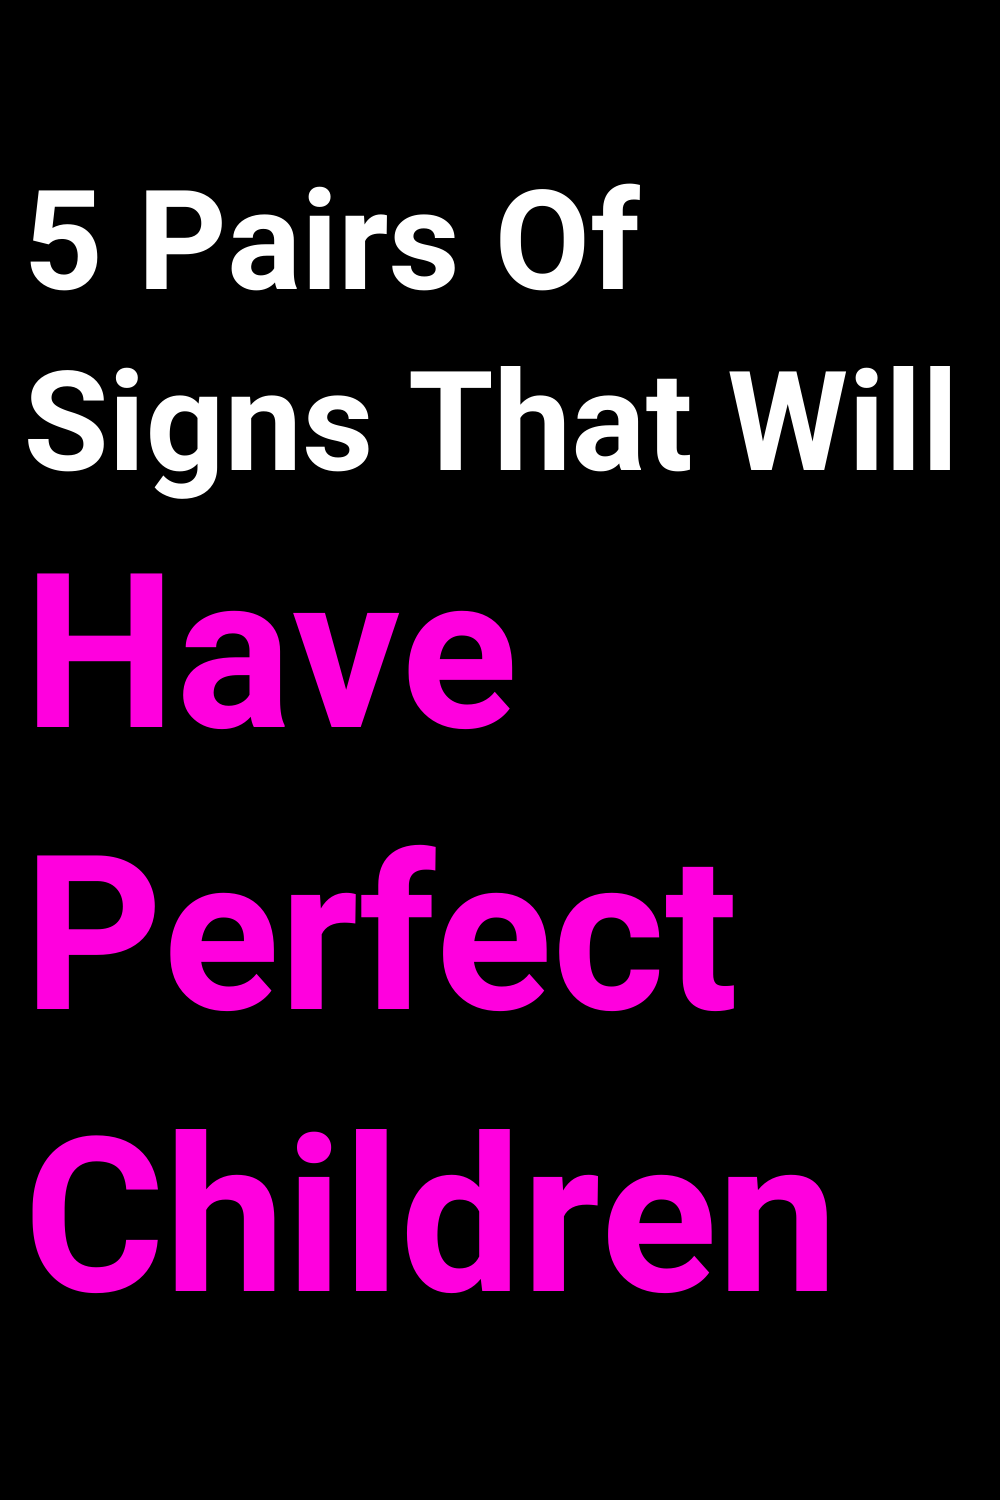 5 Pairs Of Signs That Will Have Perfect Children